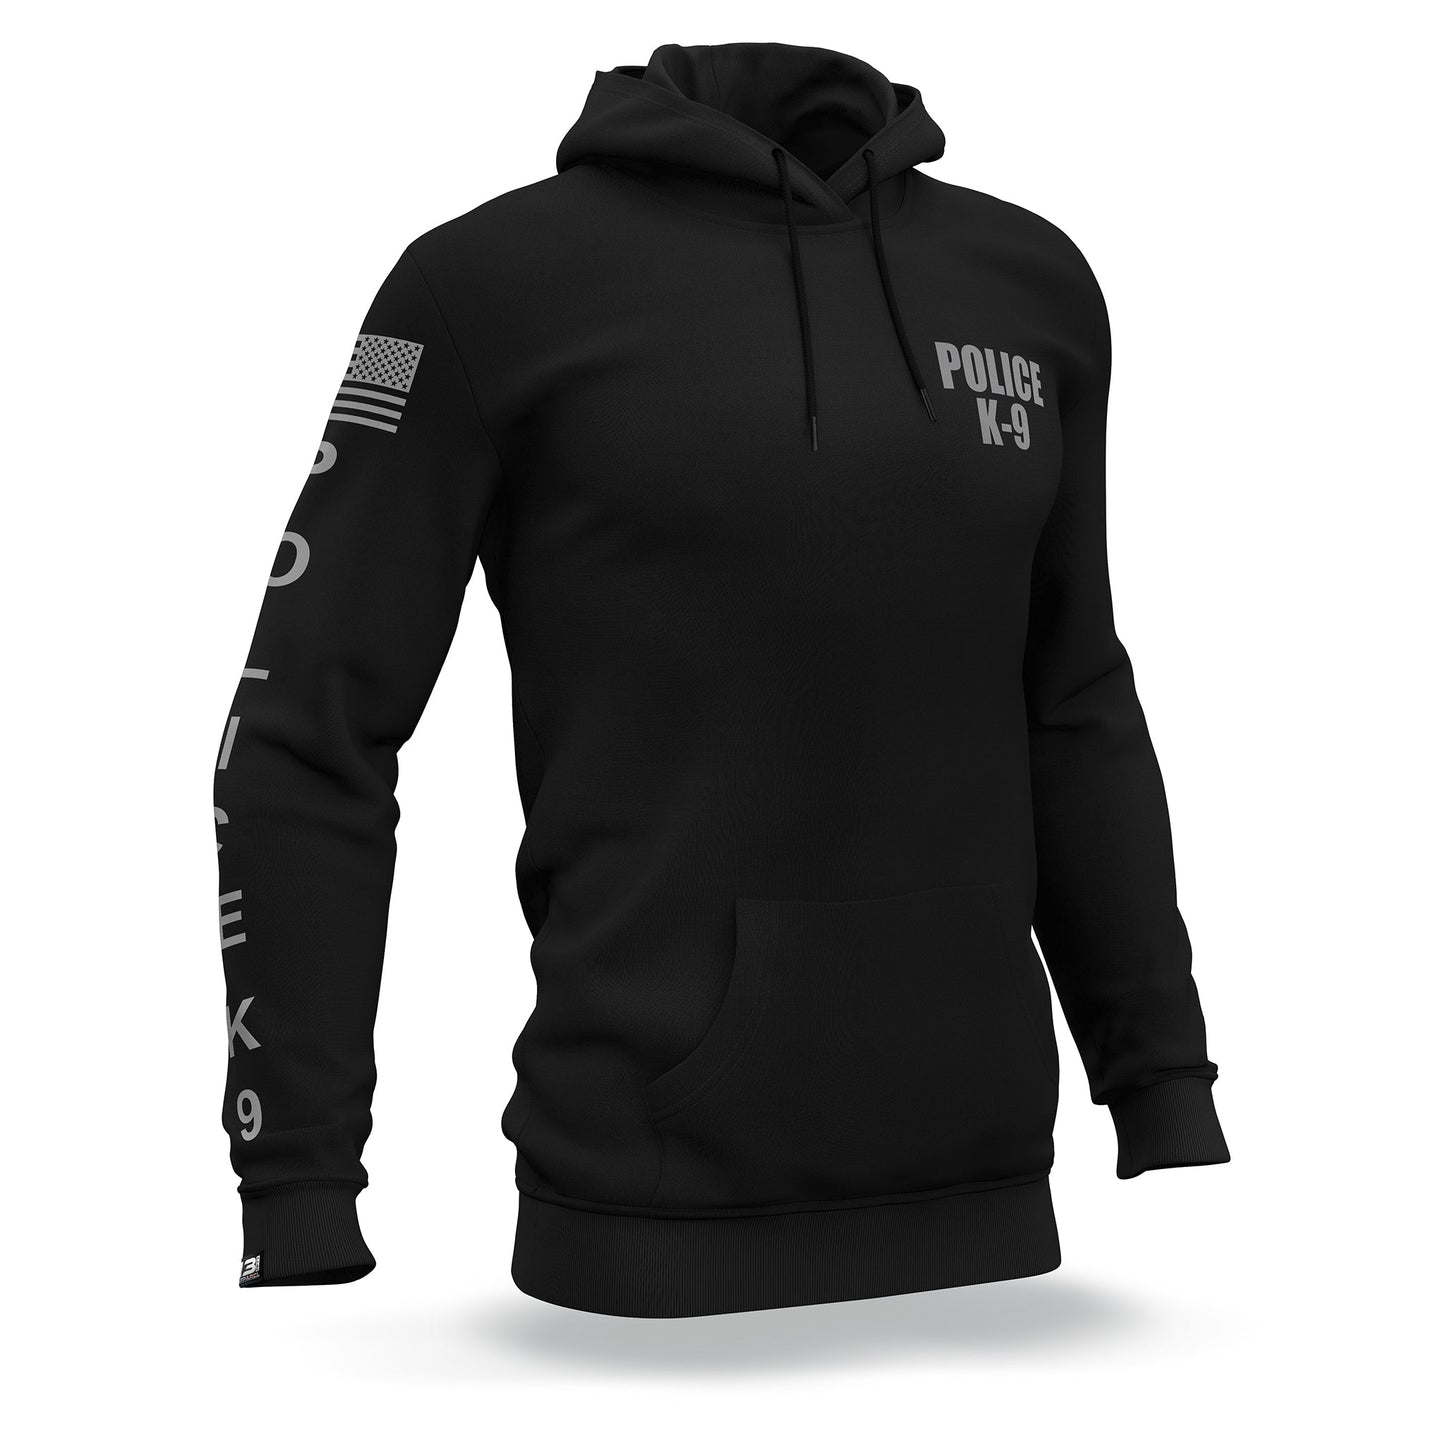 [POLICE K9] Performance Hoodie [BLK/GRY]-13 Fifty Apparel